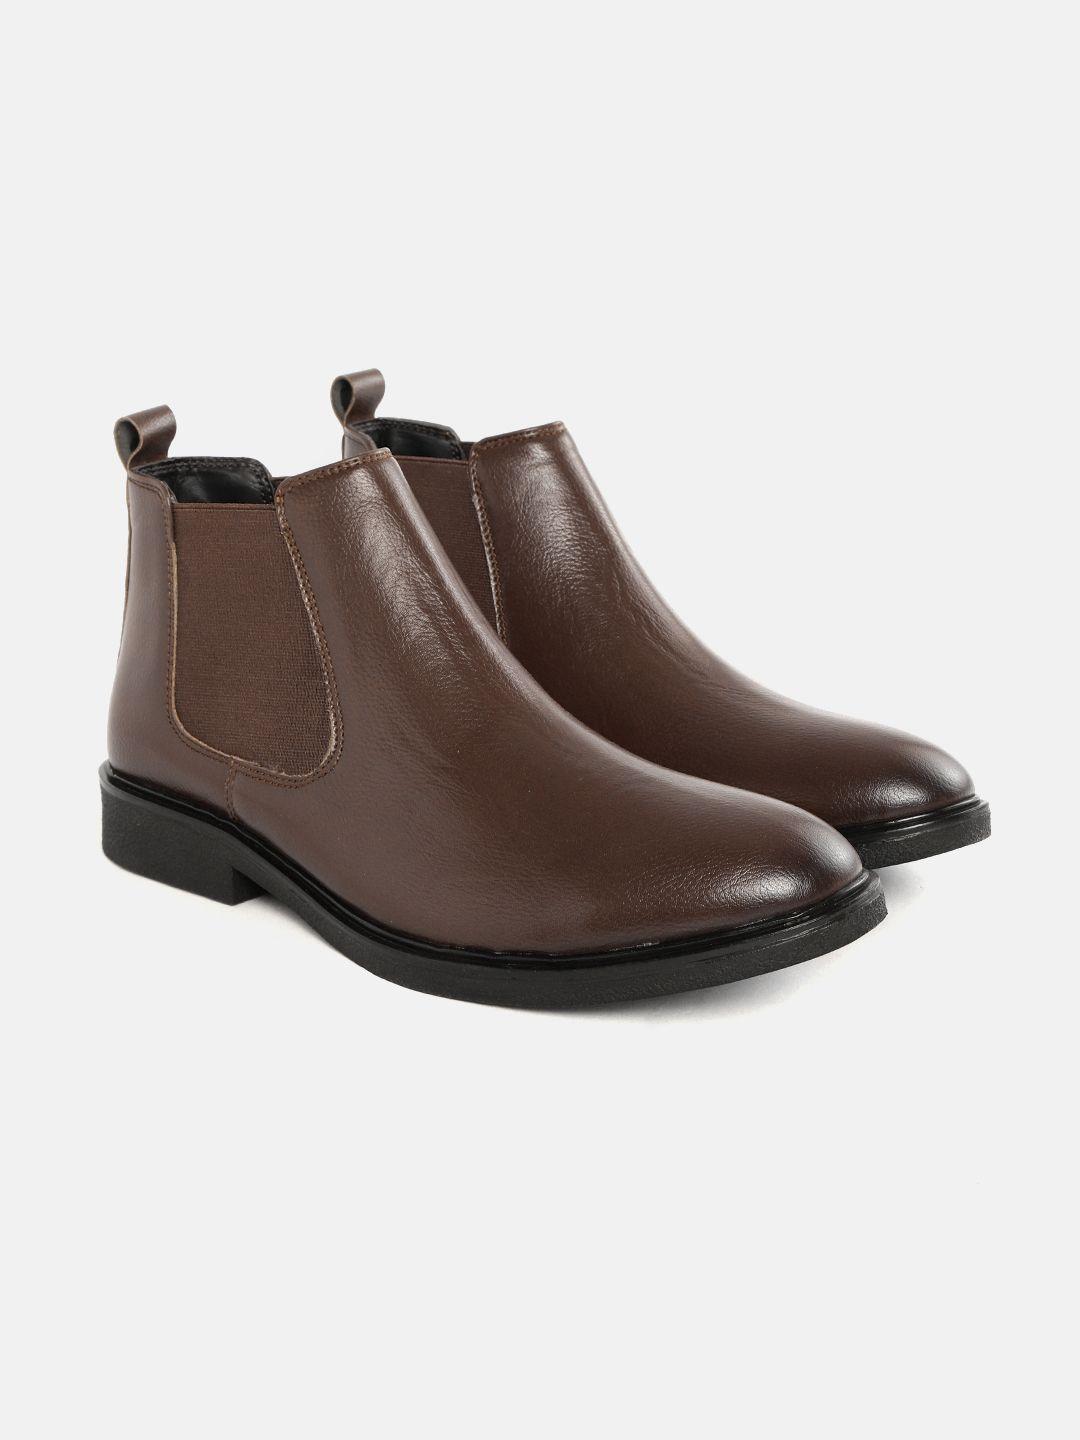 carlton london men coffee brown solid mid-top chelsea boots